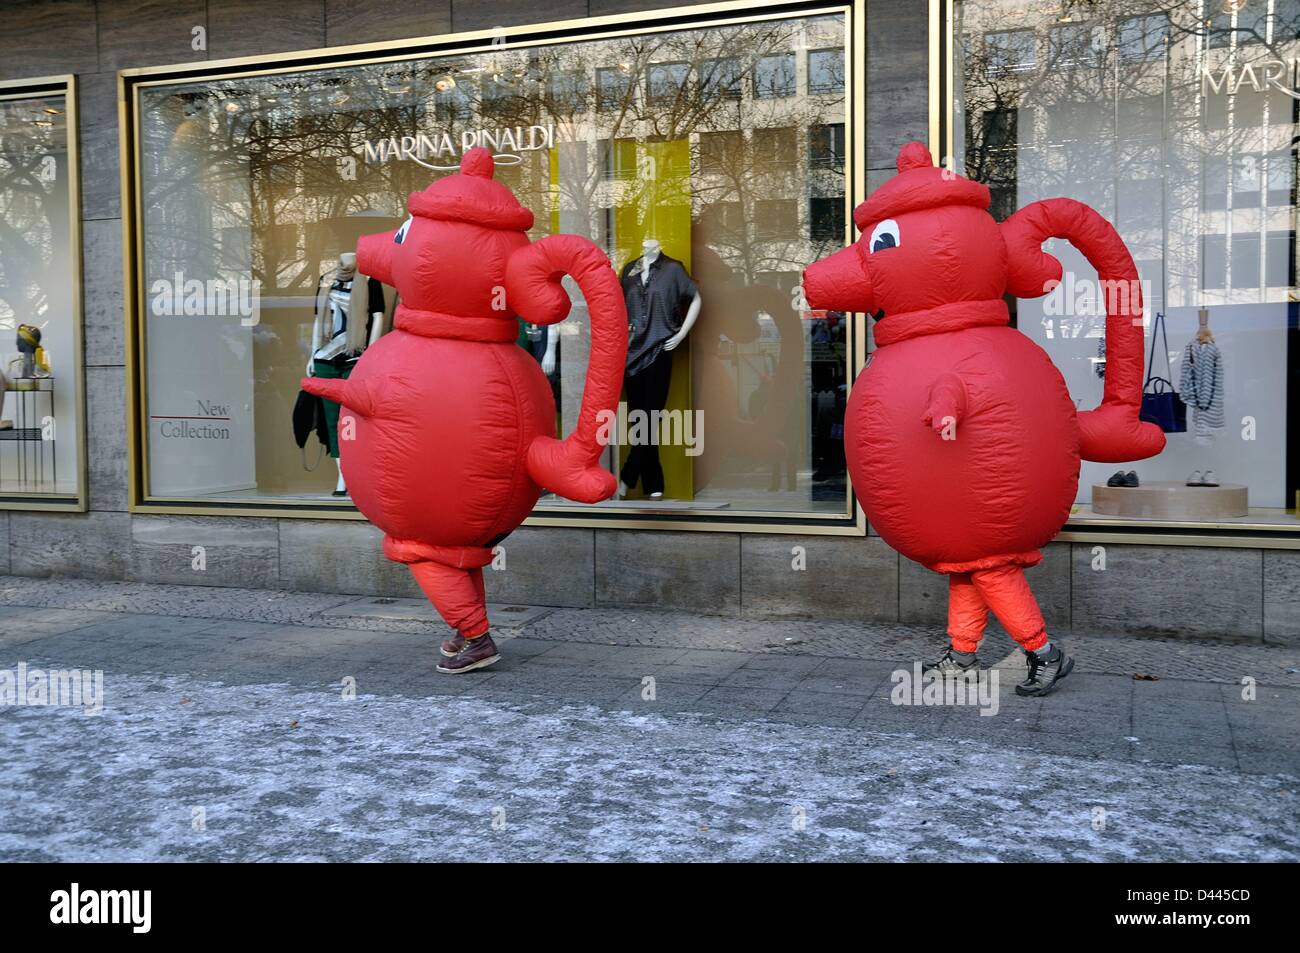 The German supermarkt chain Kaiser's Tengelmann advertises with two promoters wearing red coffee pots on Kurfürstendamm in Berlin, Germany, 12 February 2012. The red coffee pot is the logo of the company. Fotoarchiv für Zeitgeschichte/S.Steinach Stock Photo